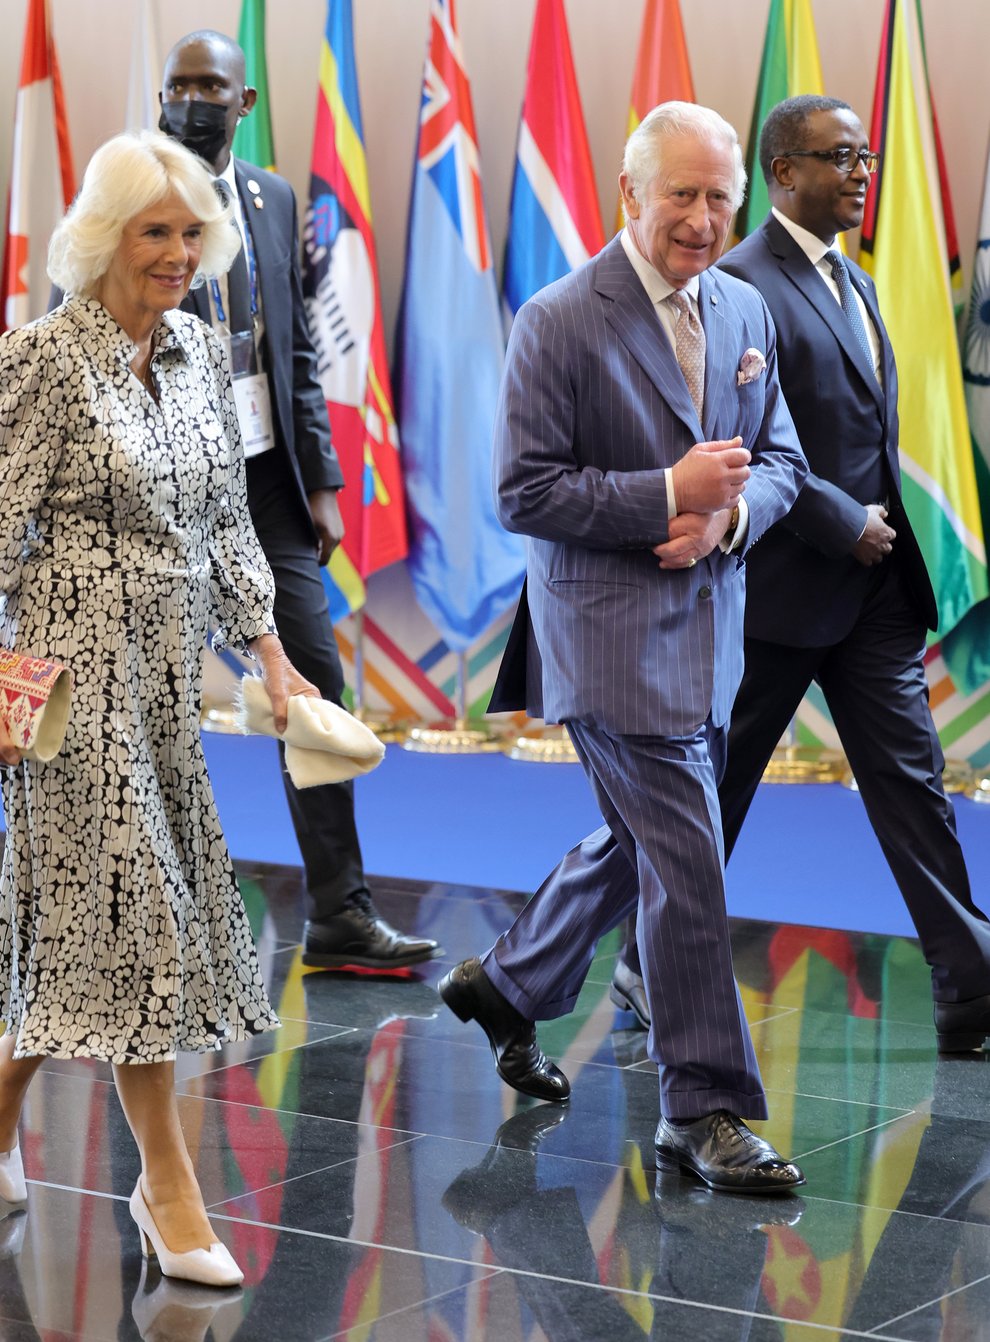 The Prince of Wales and the Duchess of Cornwall attend the Commonwealth Heads of Government Meeting (Chogm) opening ceremony at Kigali Convention Centre, Rwanda (Chris Jackson/PA)